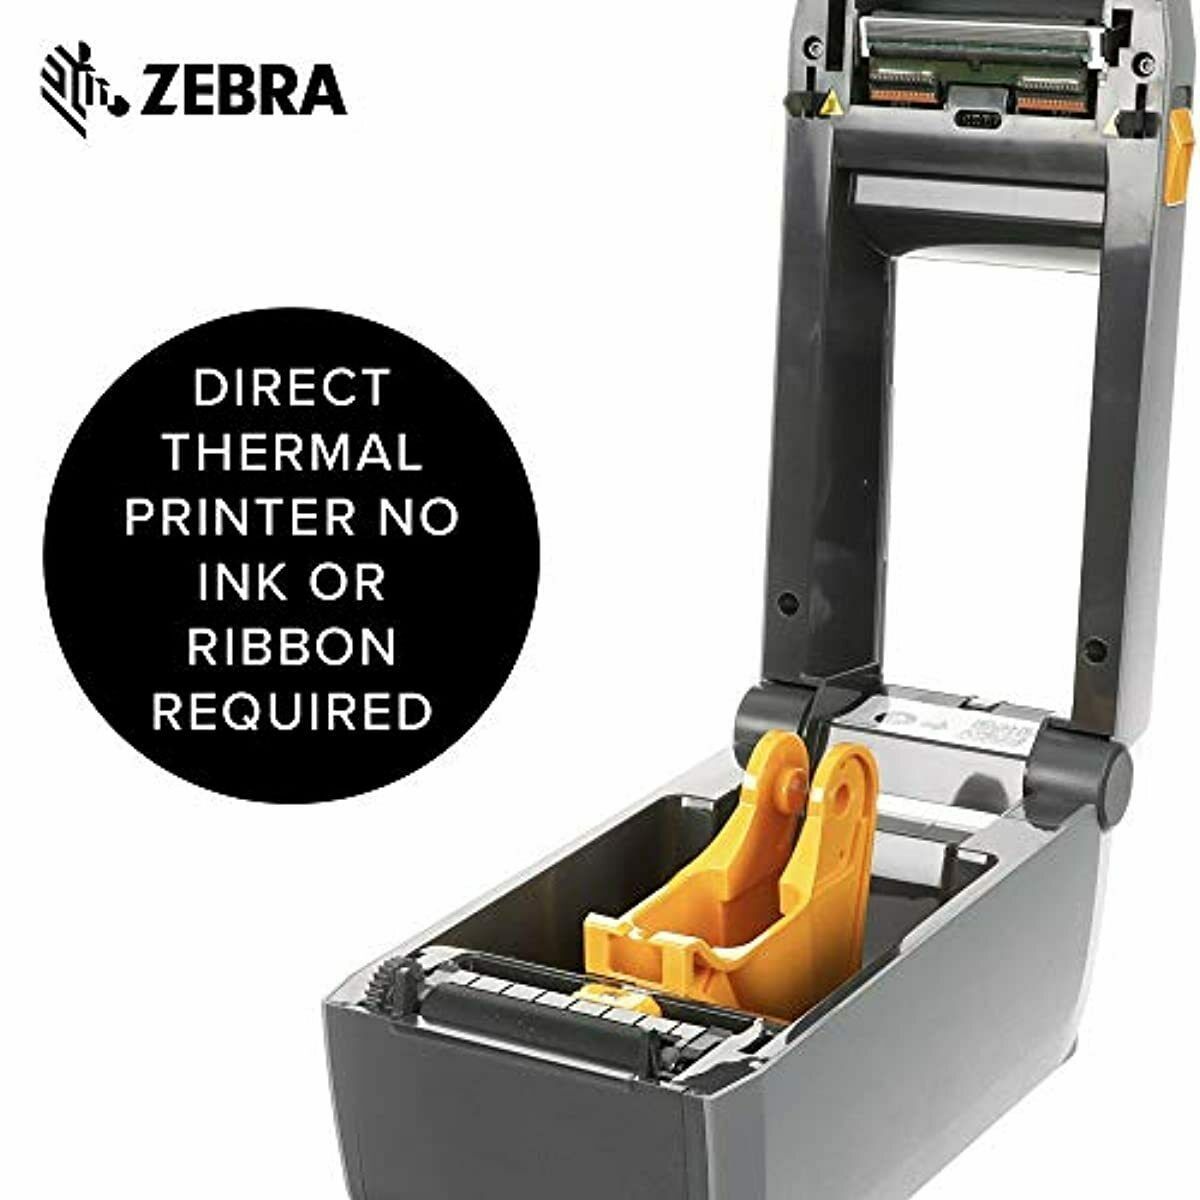 Zebra Zd410 Direct Thermal Desktop Printer For Labels Receipts Barcodes Tag Printers 6600